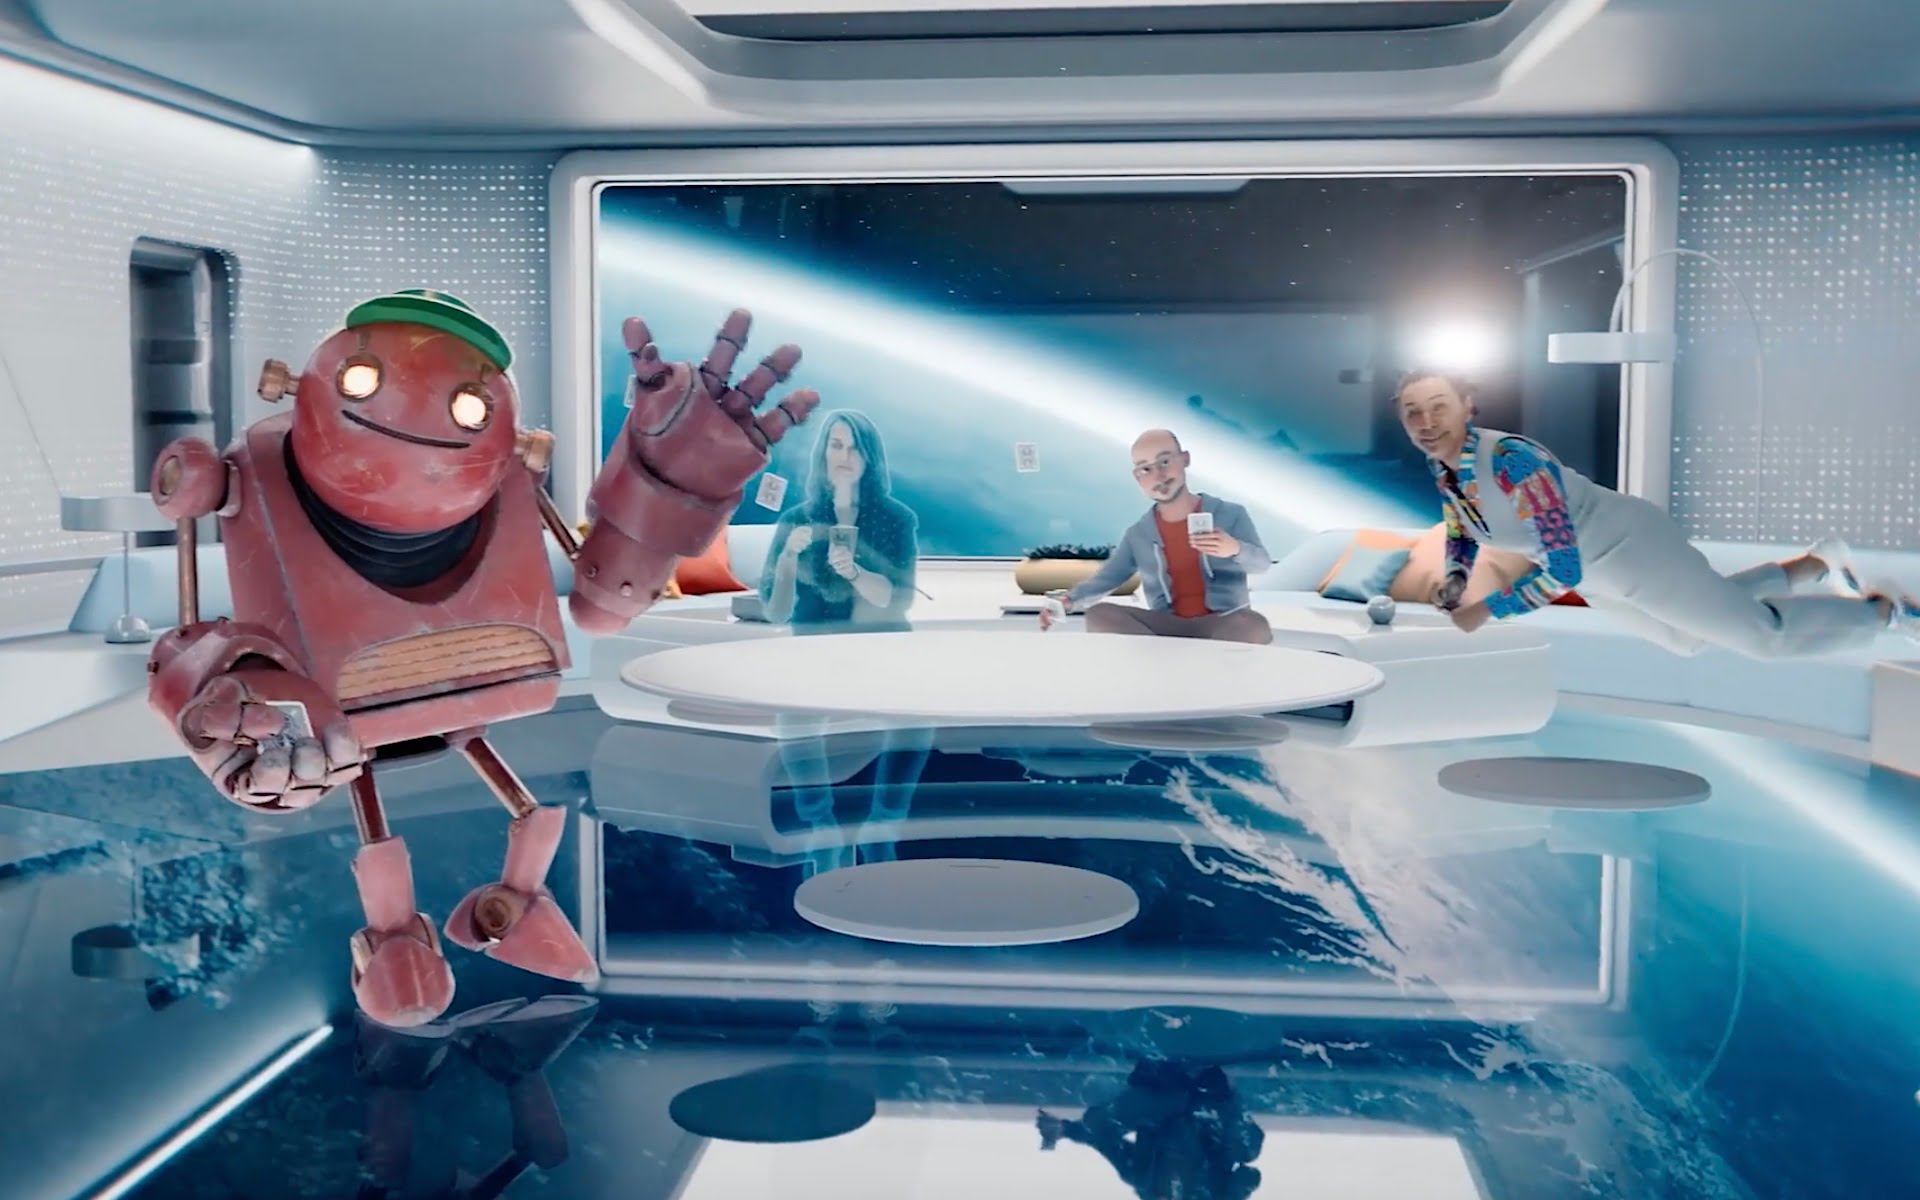 Various avatars wave and greet in a futuristic space station.